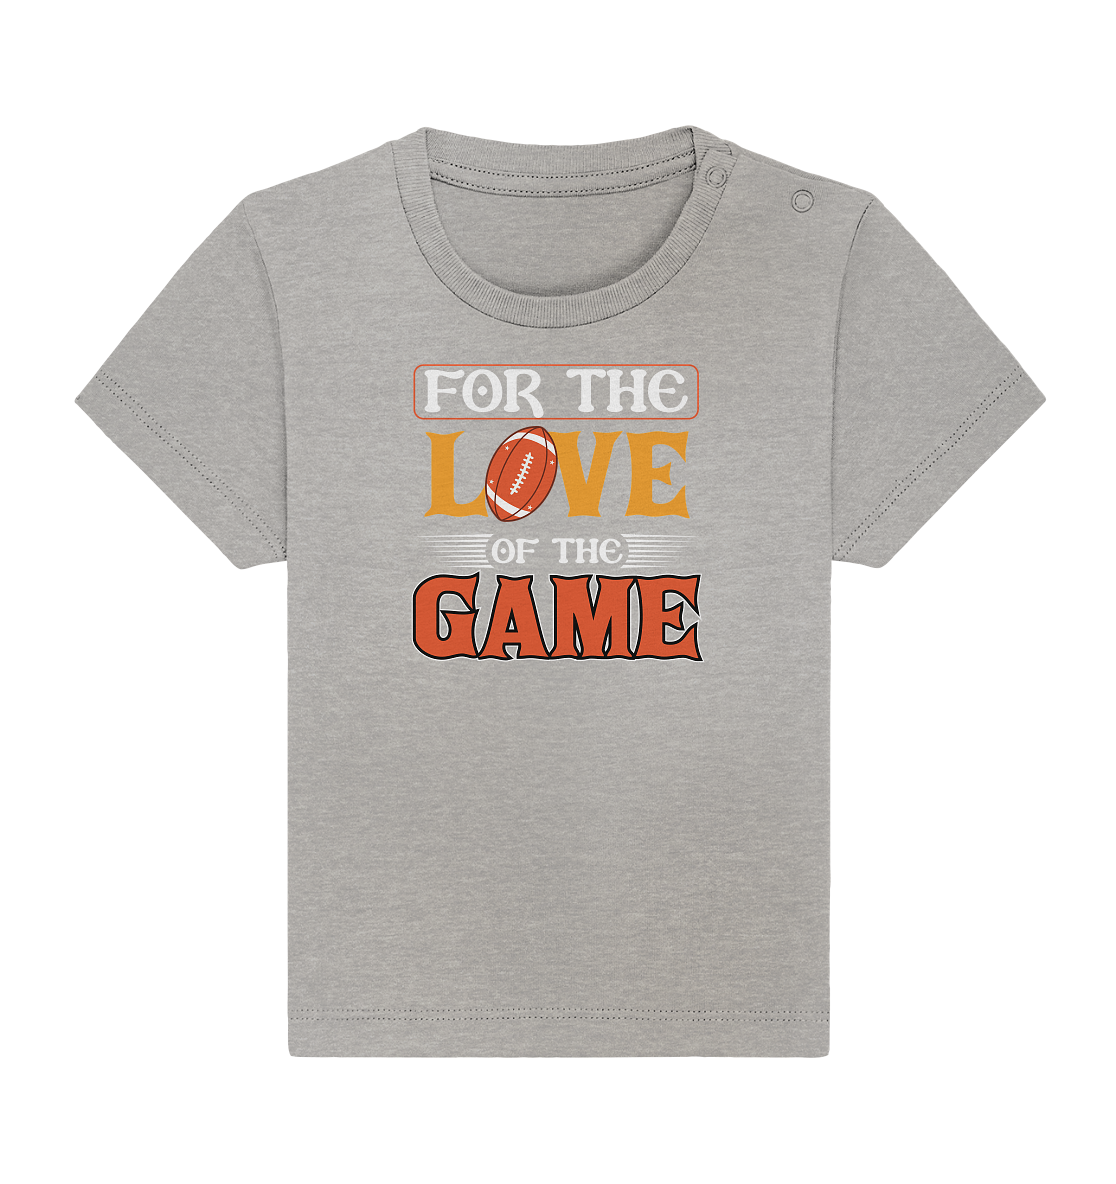 For the Love of the Game - Baby Organic Shirt - Football Unity Football Unity